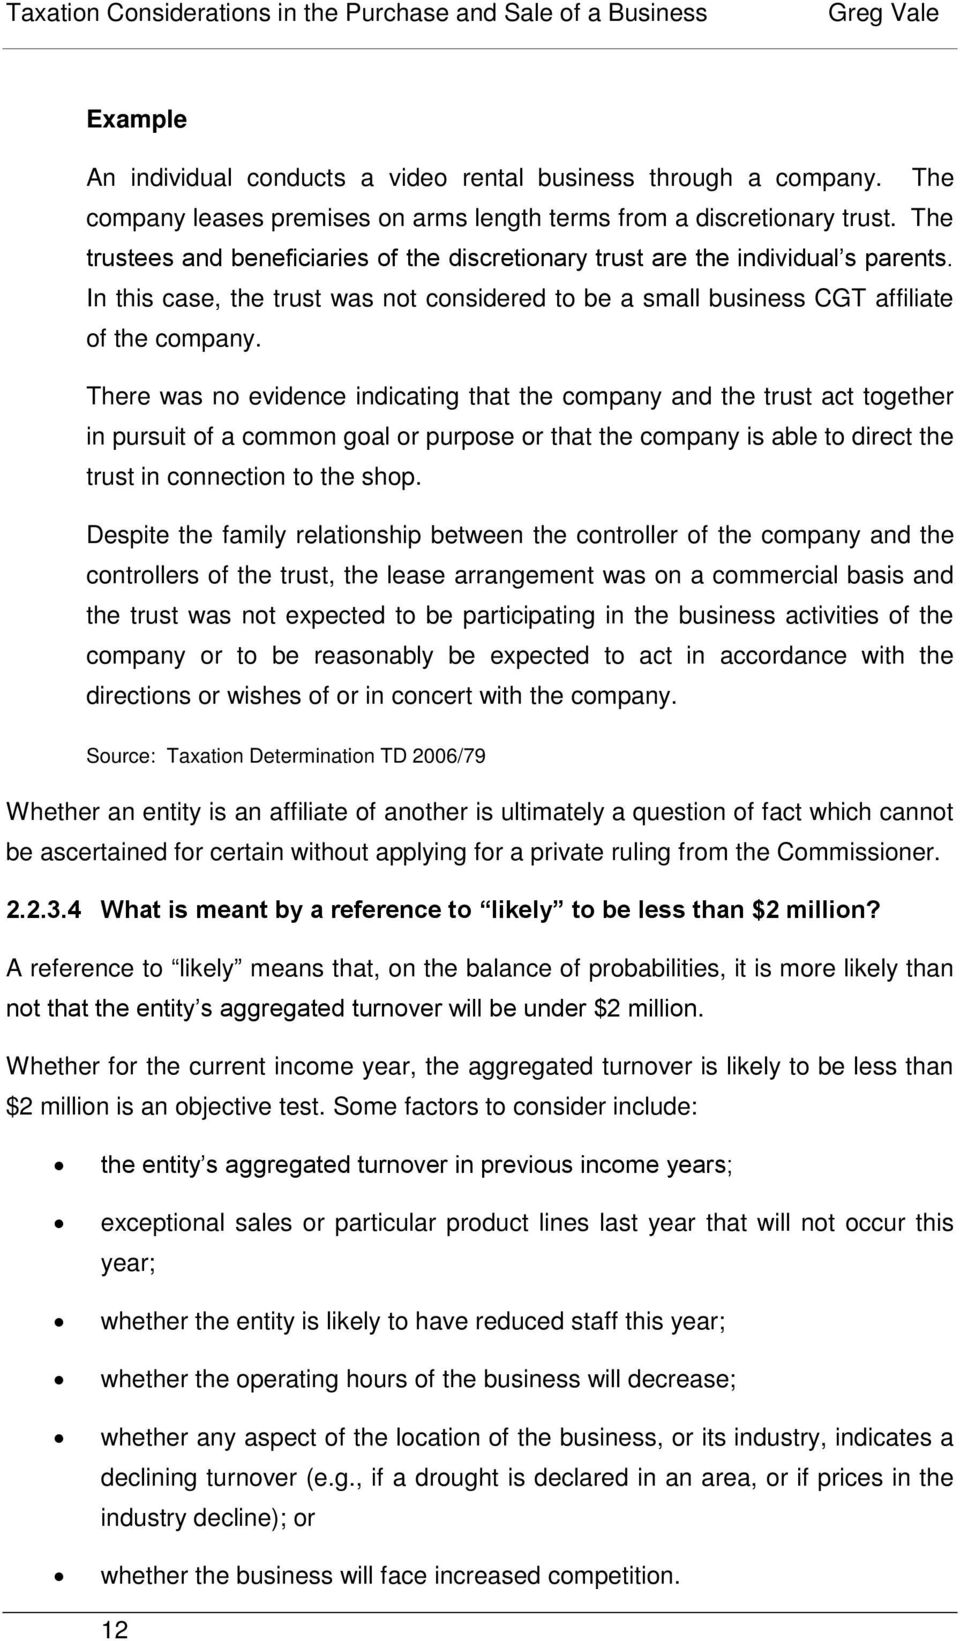 There was no evidence indicating that the company and the trust act together in pursuit of a common goal or purpose or that the company is able to direct the trust in connection to the shop.